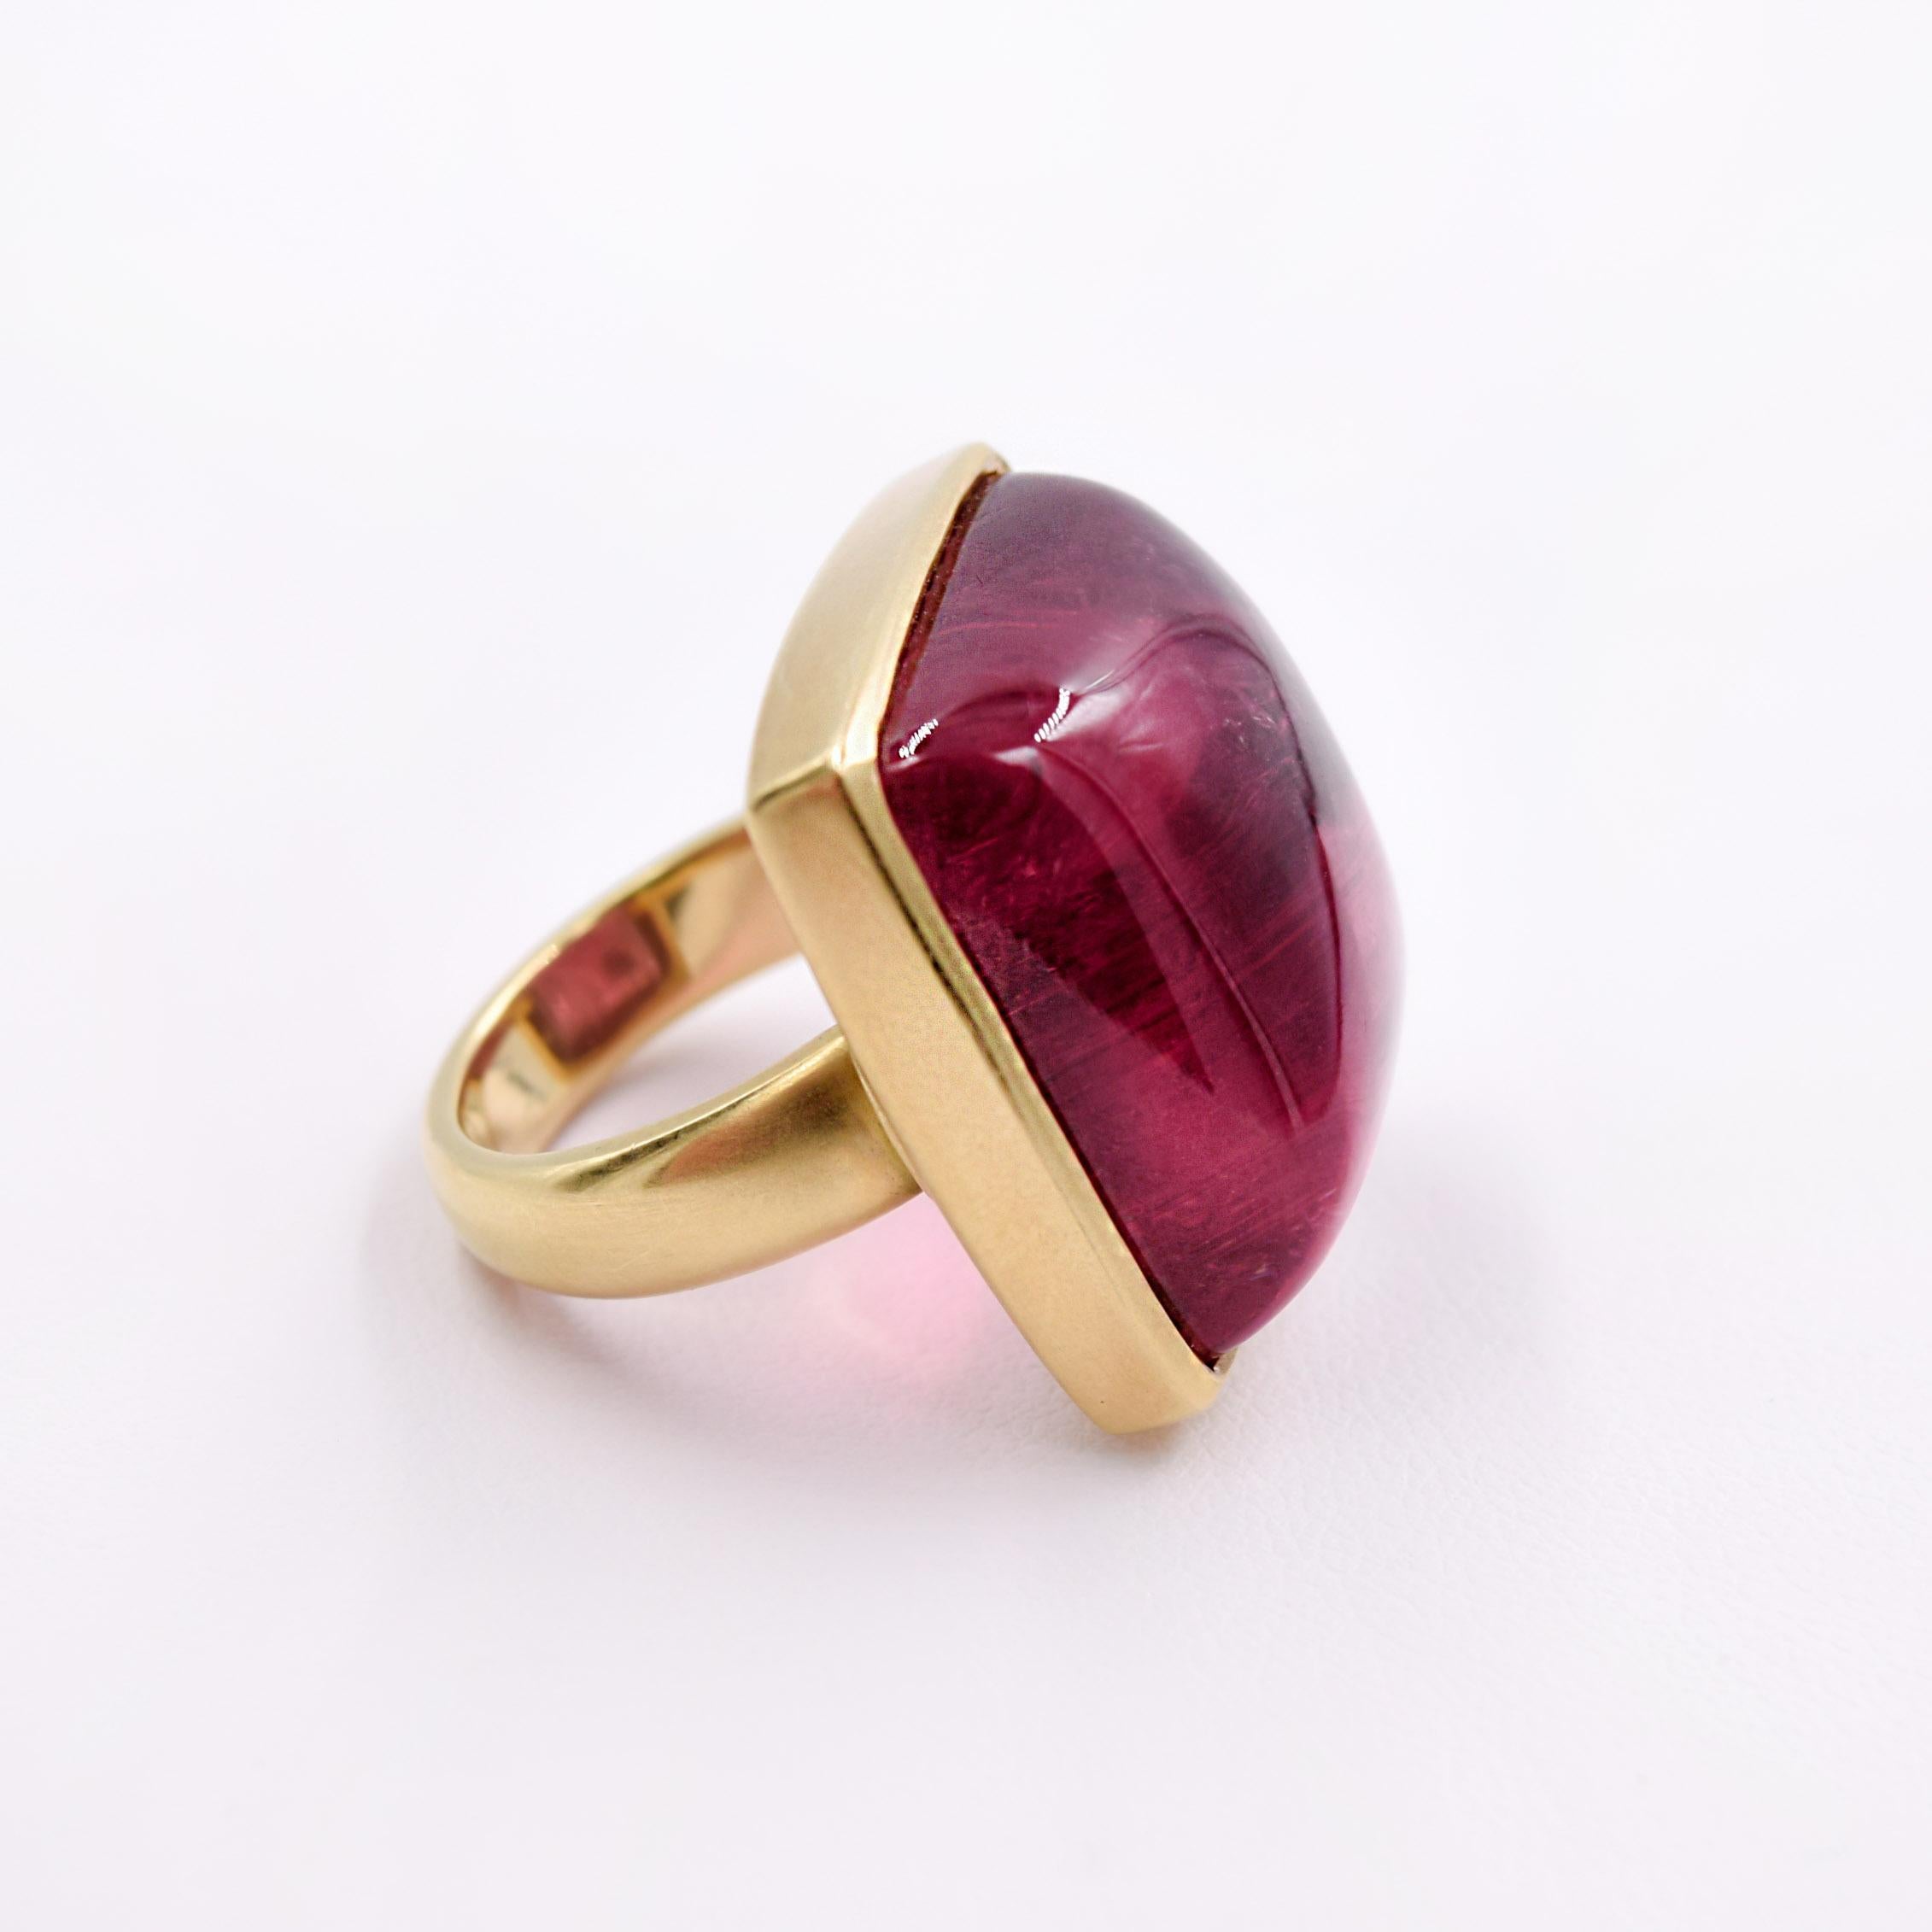 Modern Lucas Priolo 54.87 Carat Cabochon Pink Tourmaline Gold Cocktail Ring For Sale